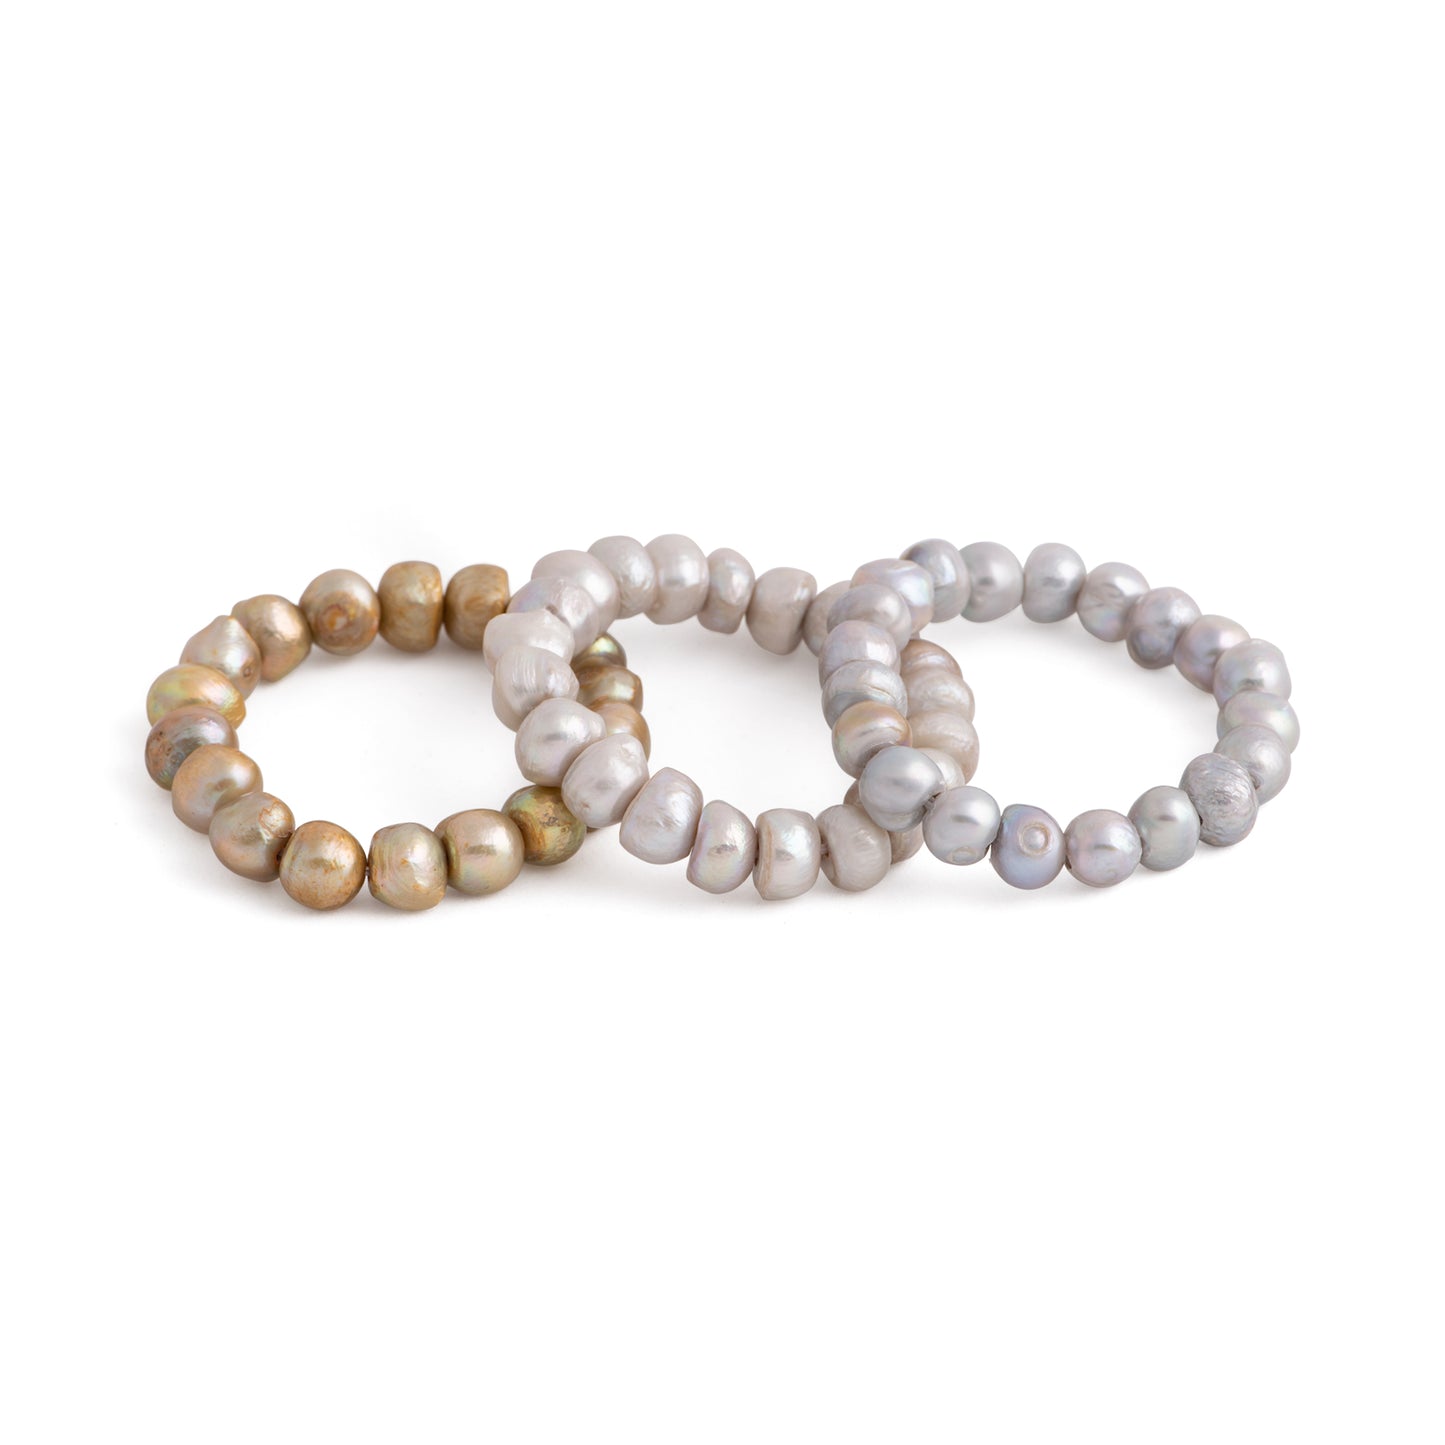 Euphrates - Freshwater pearl stretch bracelet (Gold, Champagne and Silver Bracelets)